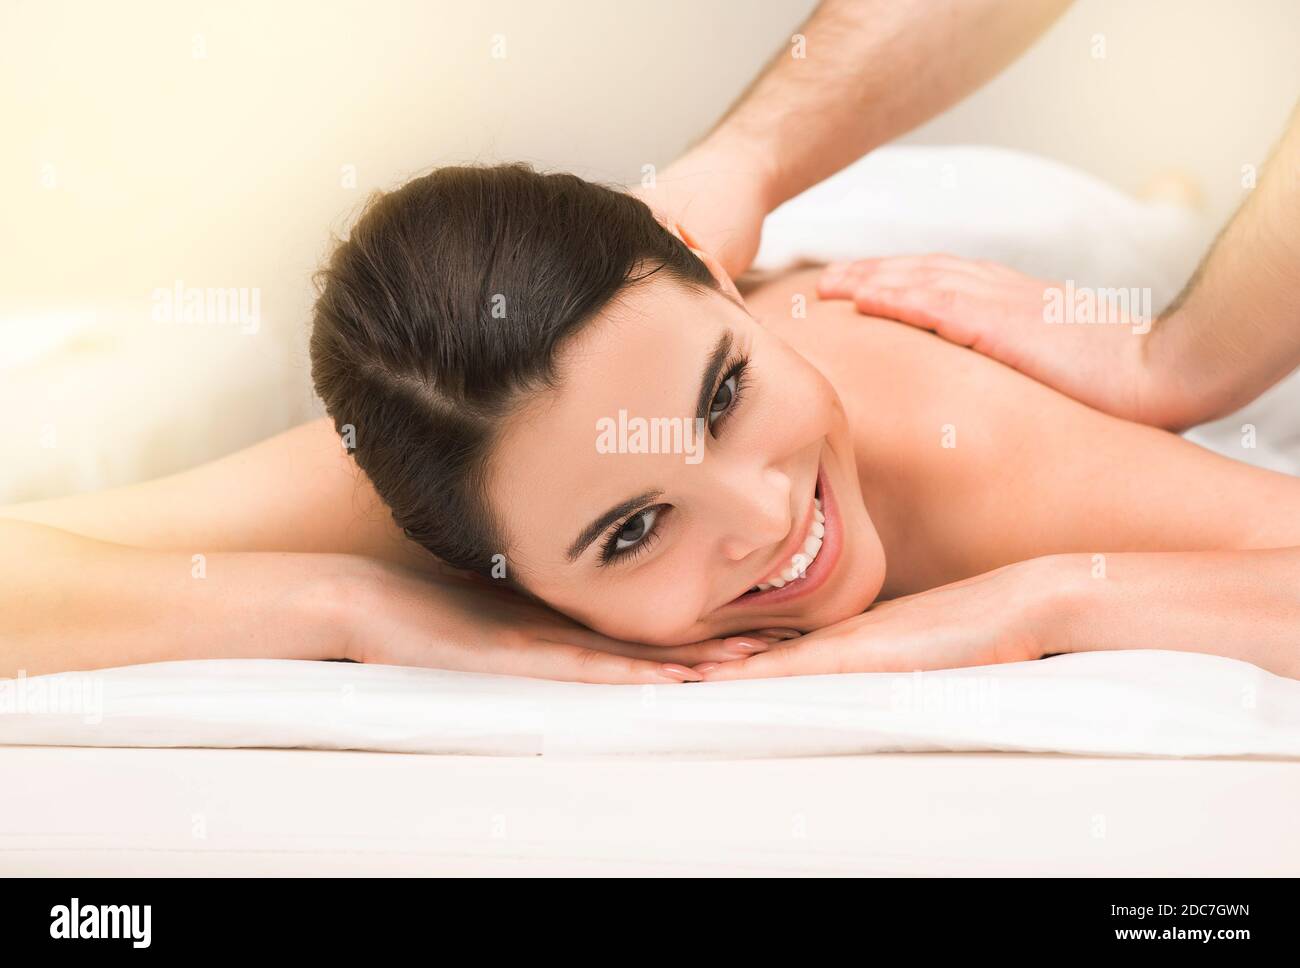 Smiling mixed race woman during a classic therapeutic back massage at a wellness spa Stock Photo